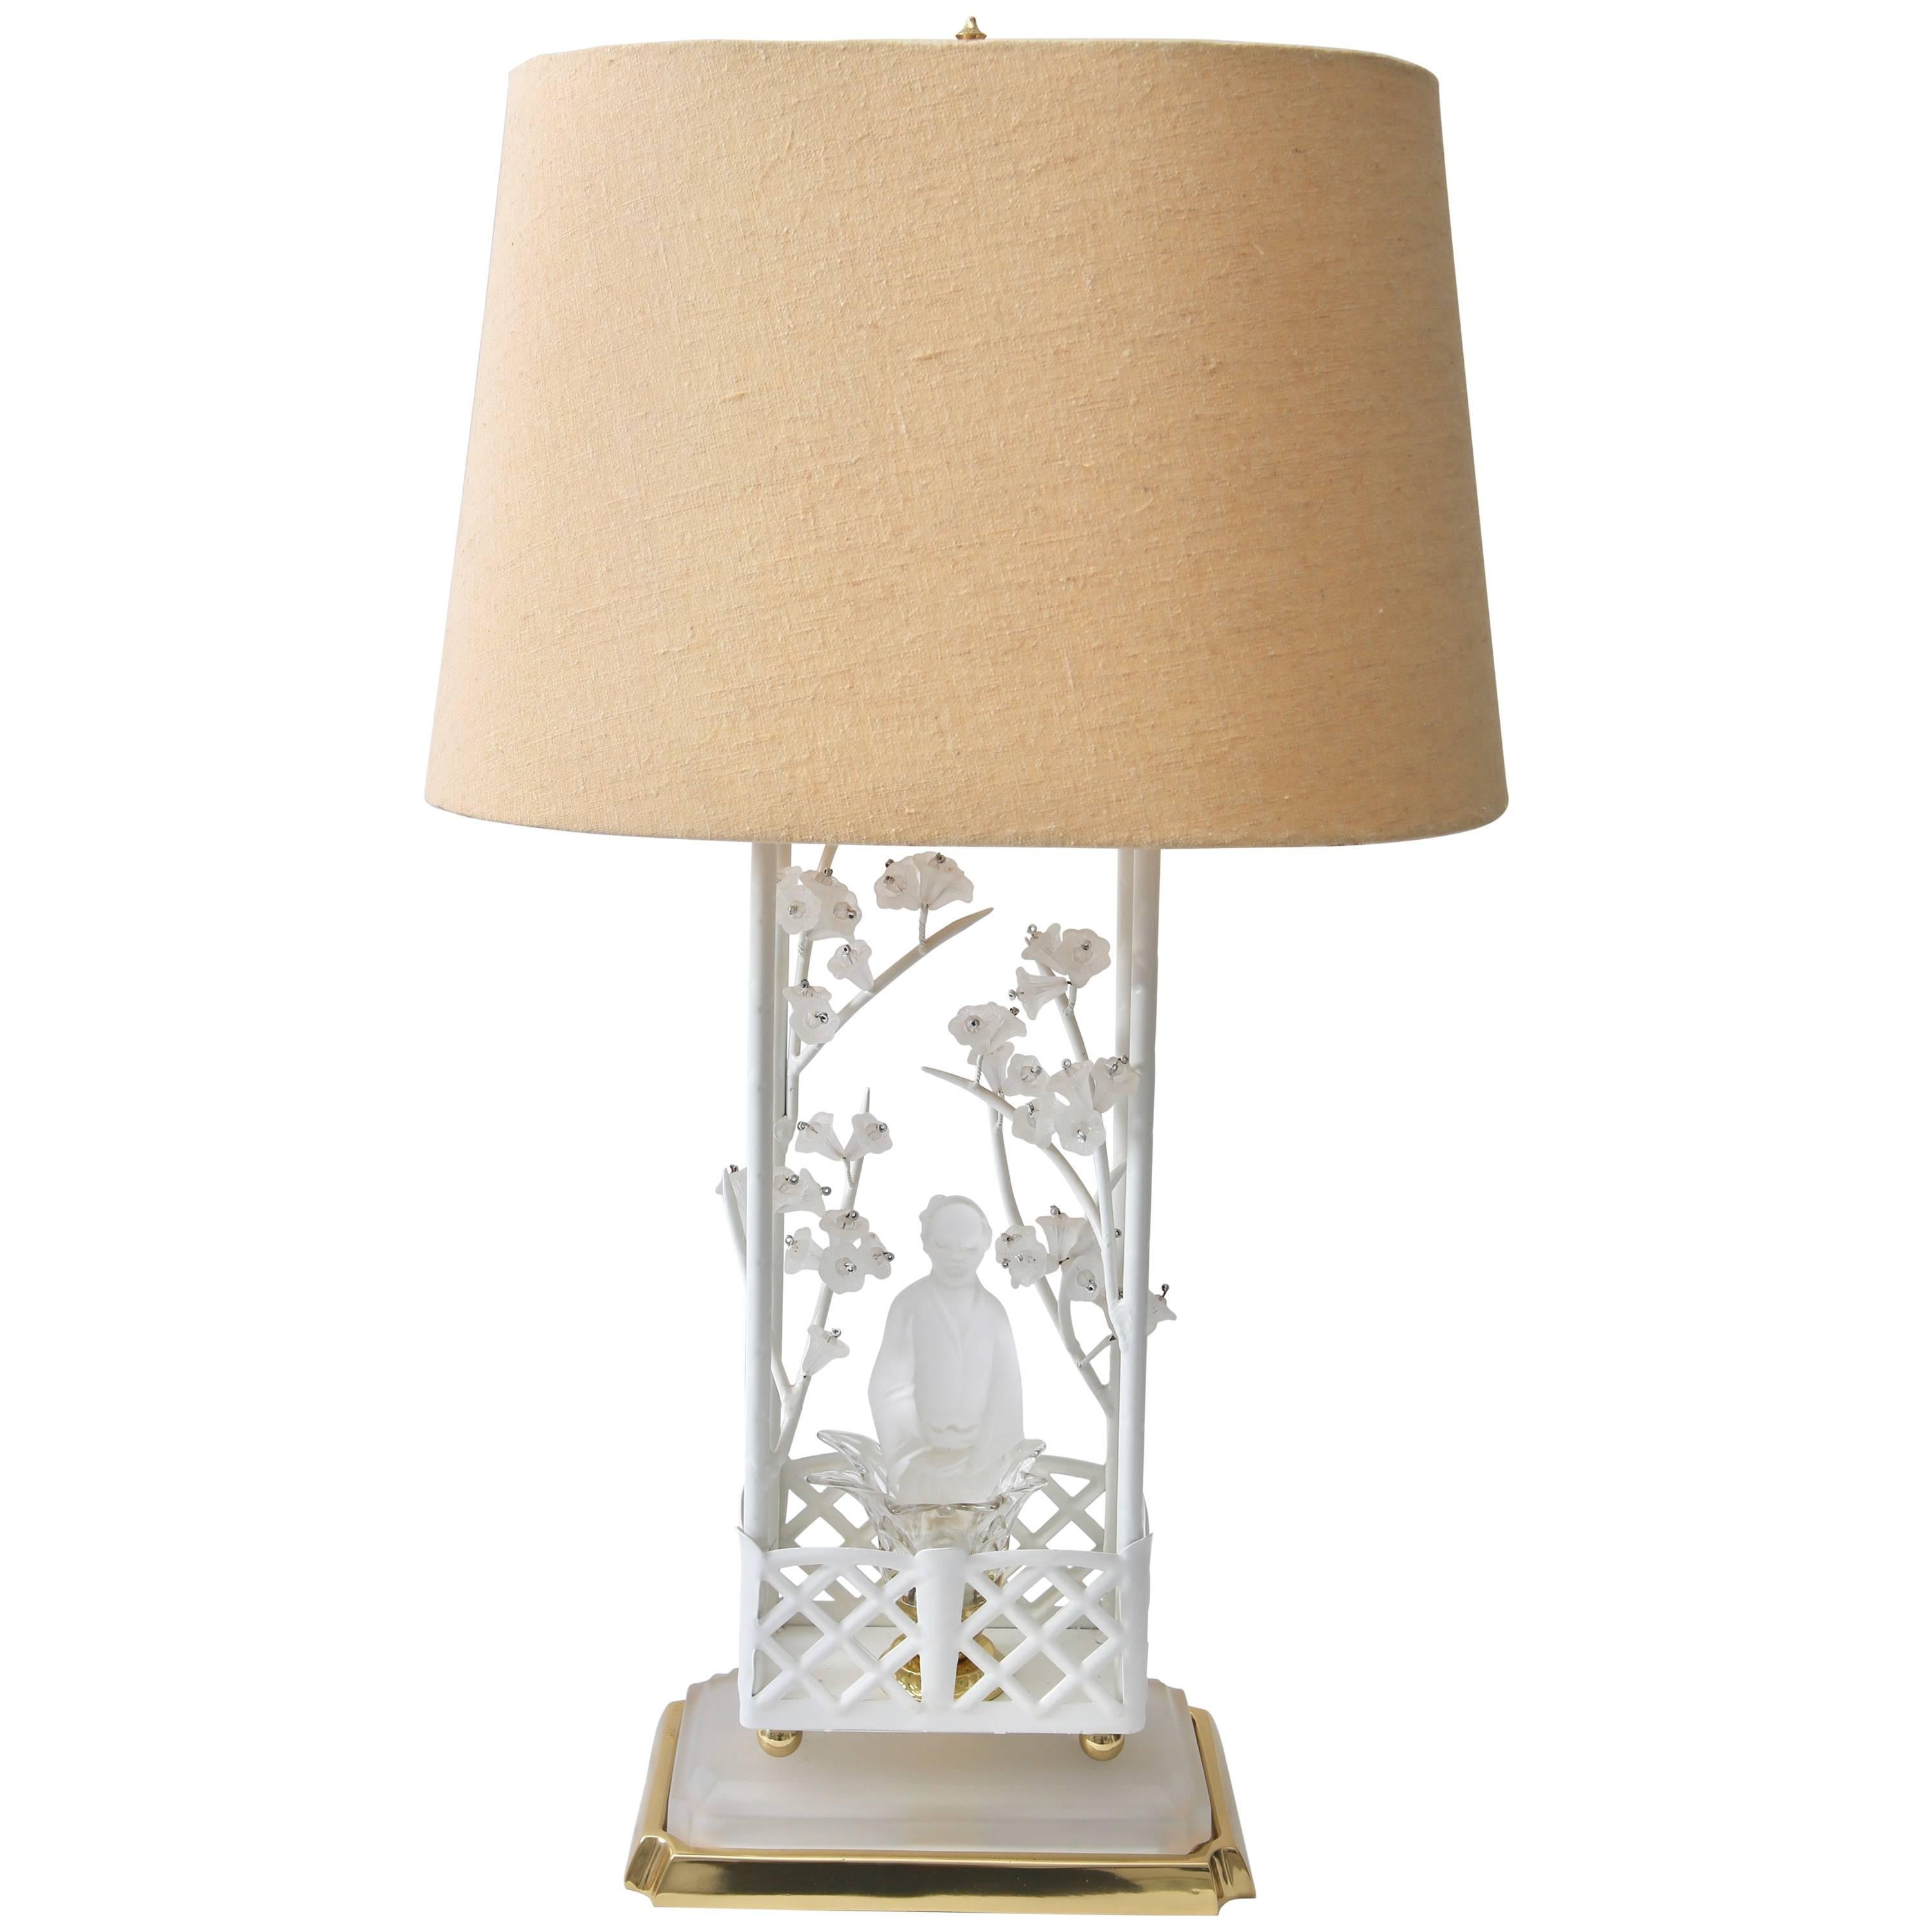  Chinoiserie Motif Table Lamp